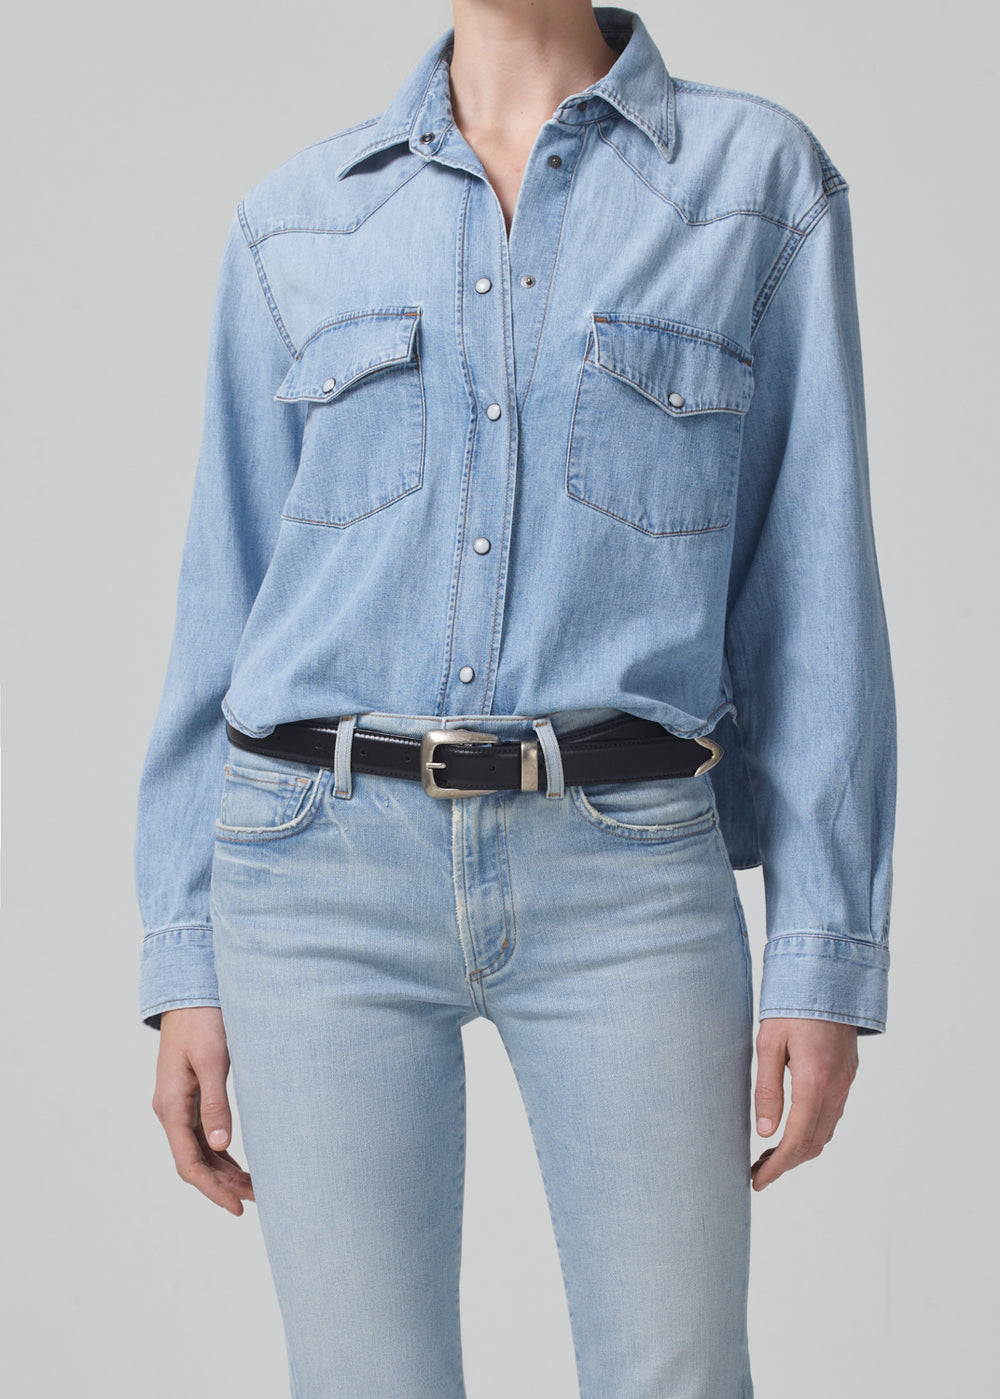 LEO BOUTIQUE CROPPED Western Shirt in Pharos CITIZENS OF HUMANITY